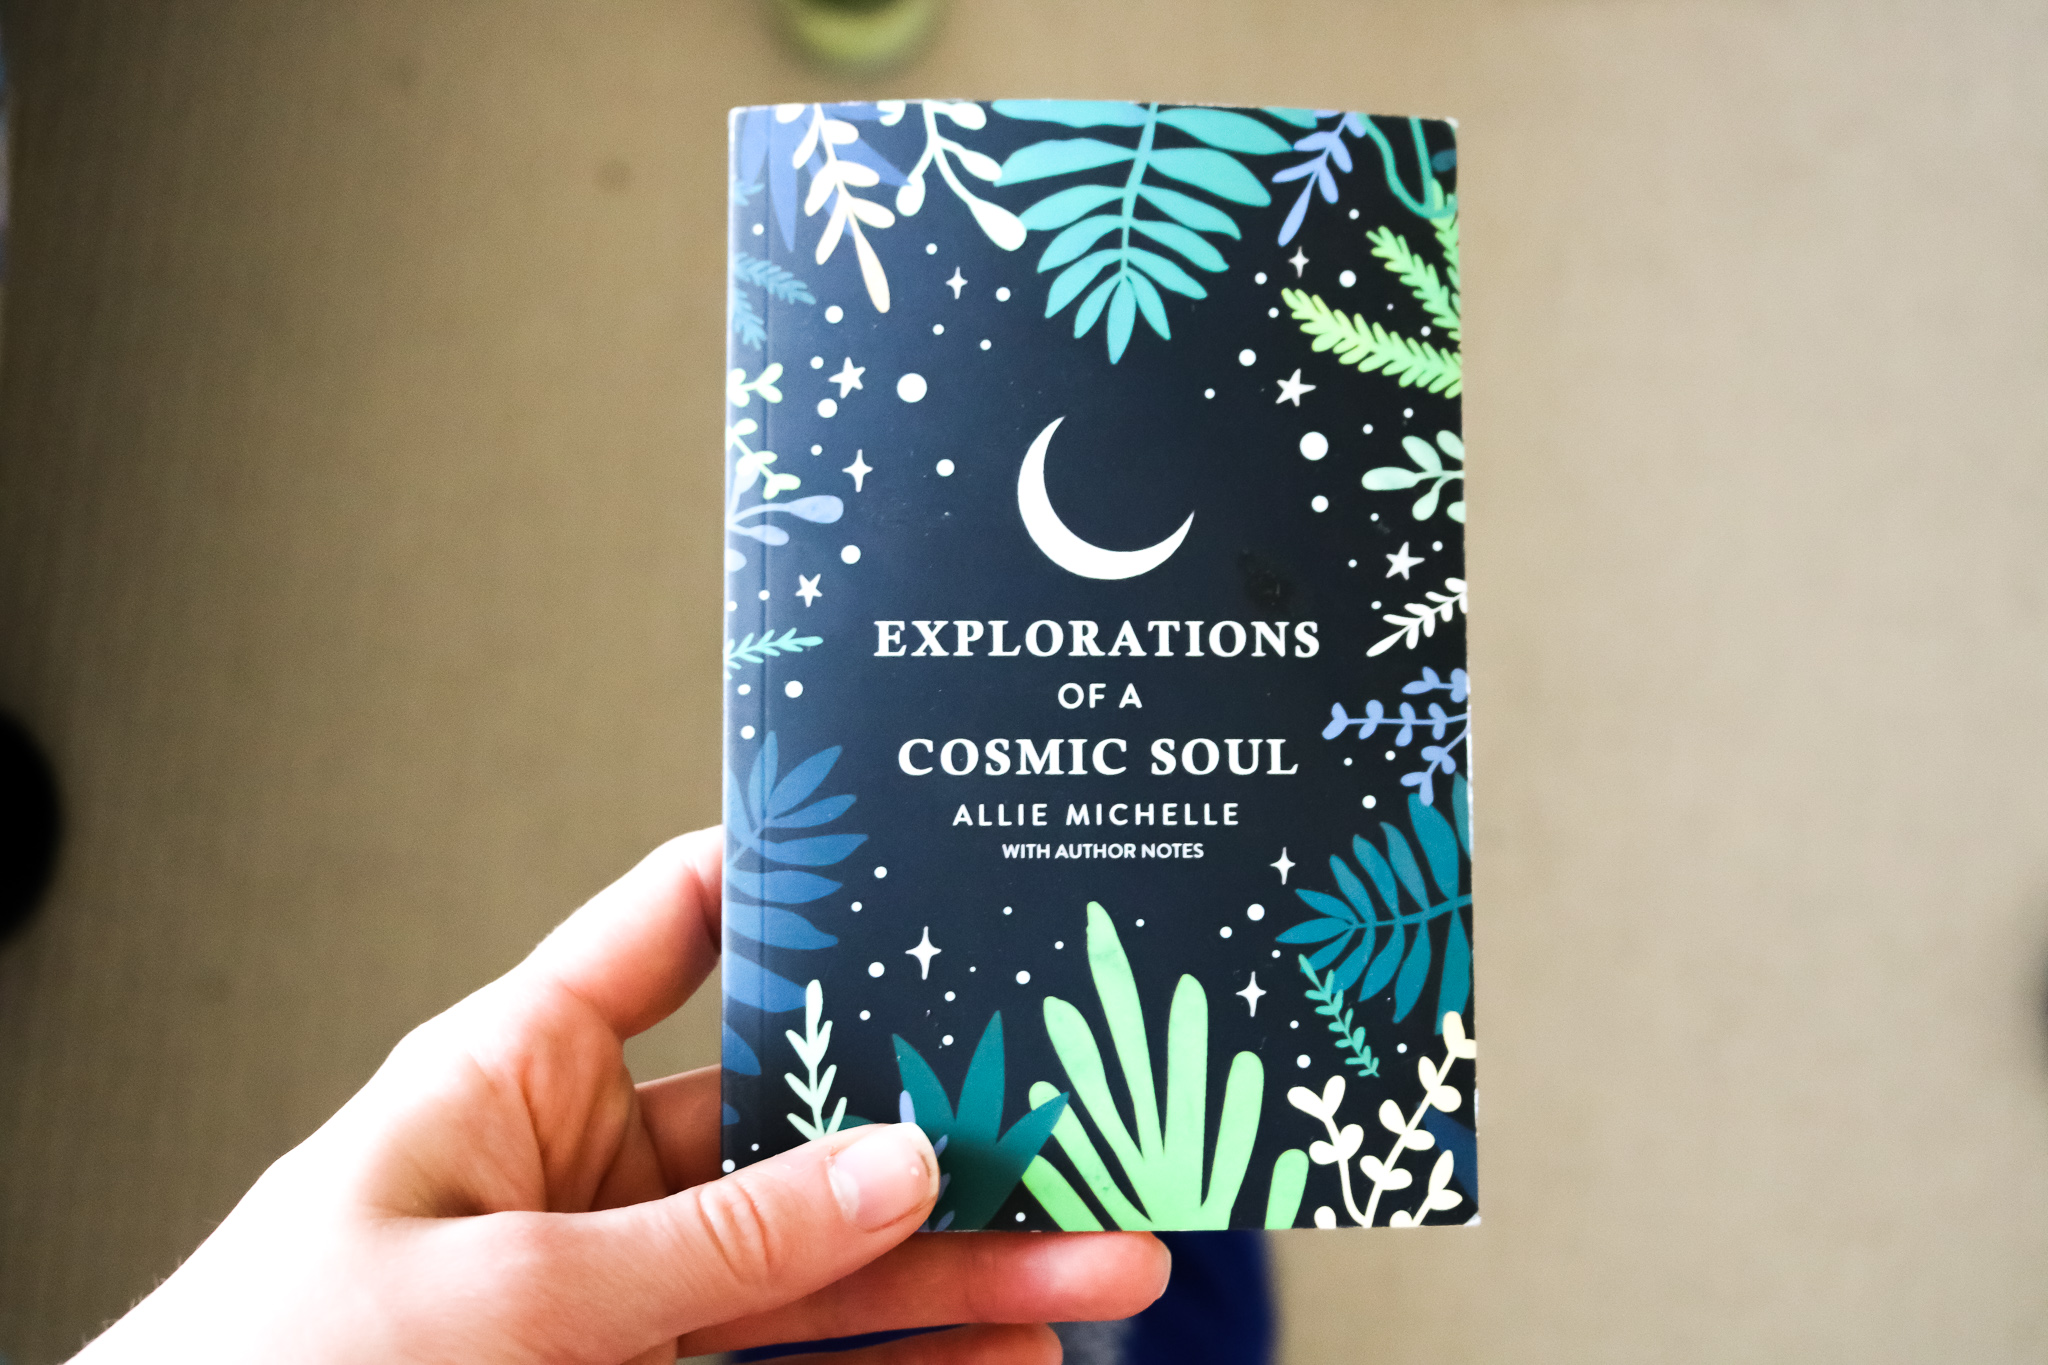 Explorations of a Cosmic Soul - Allie Michelle